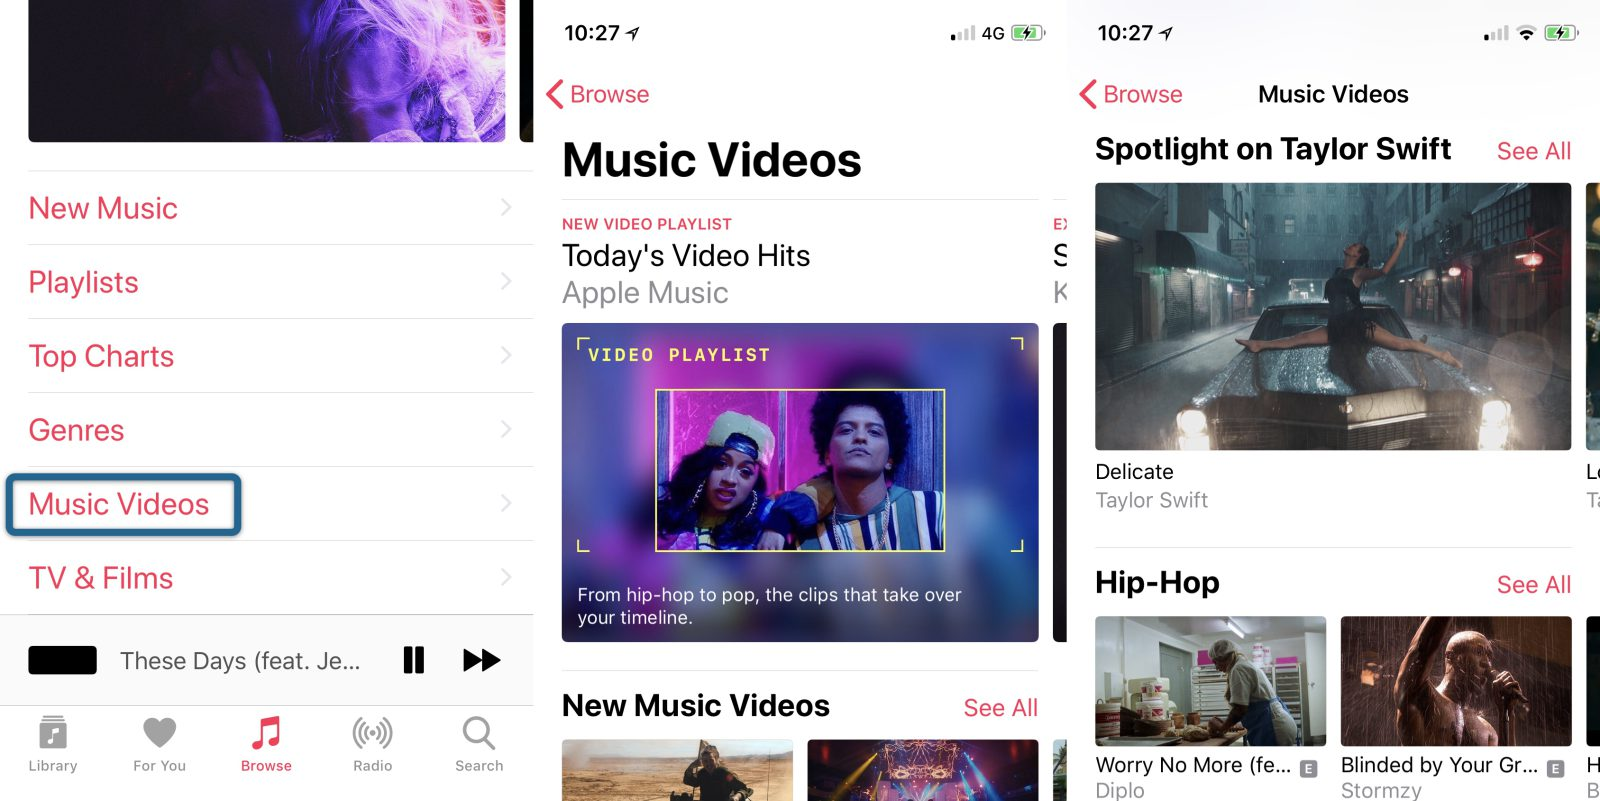 Music videos are now streaming on Apple Music